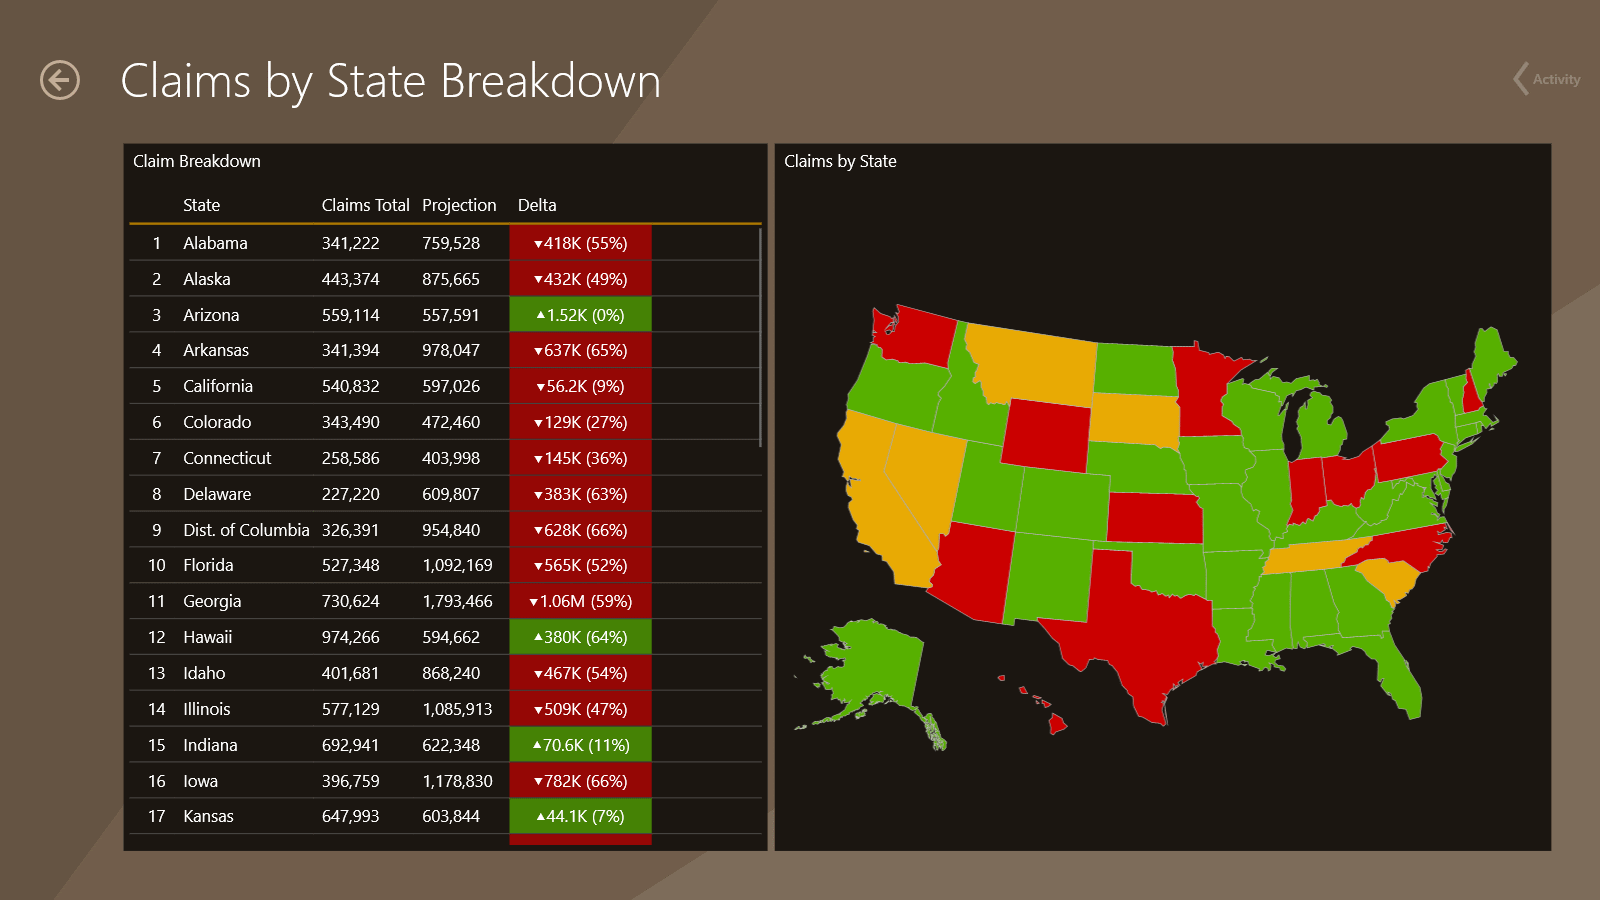 Dashboard: Claims by State Breakdown